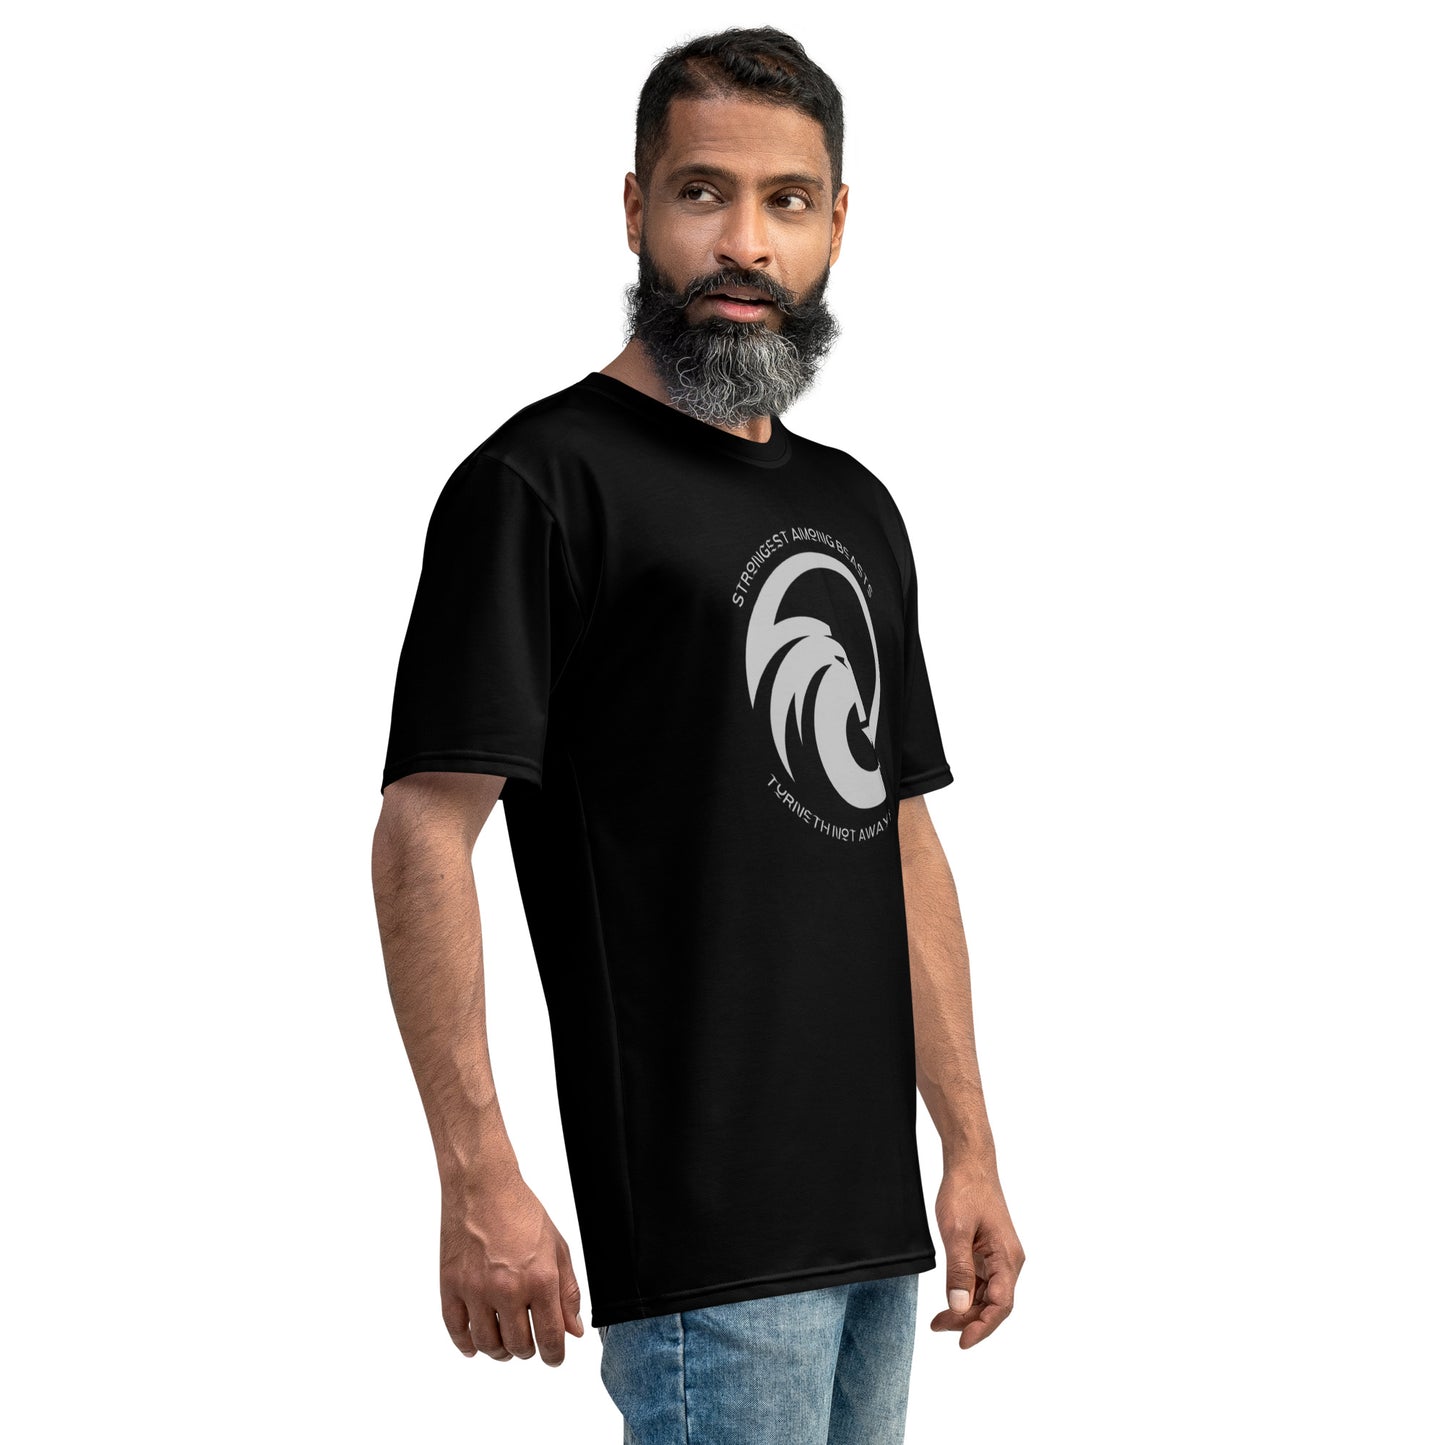 Strongest Among Beasts - Turneth Not Away For Any Men's Polyester Stretch Regular Fit T-shirt